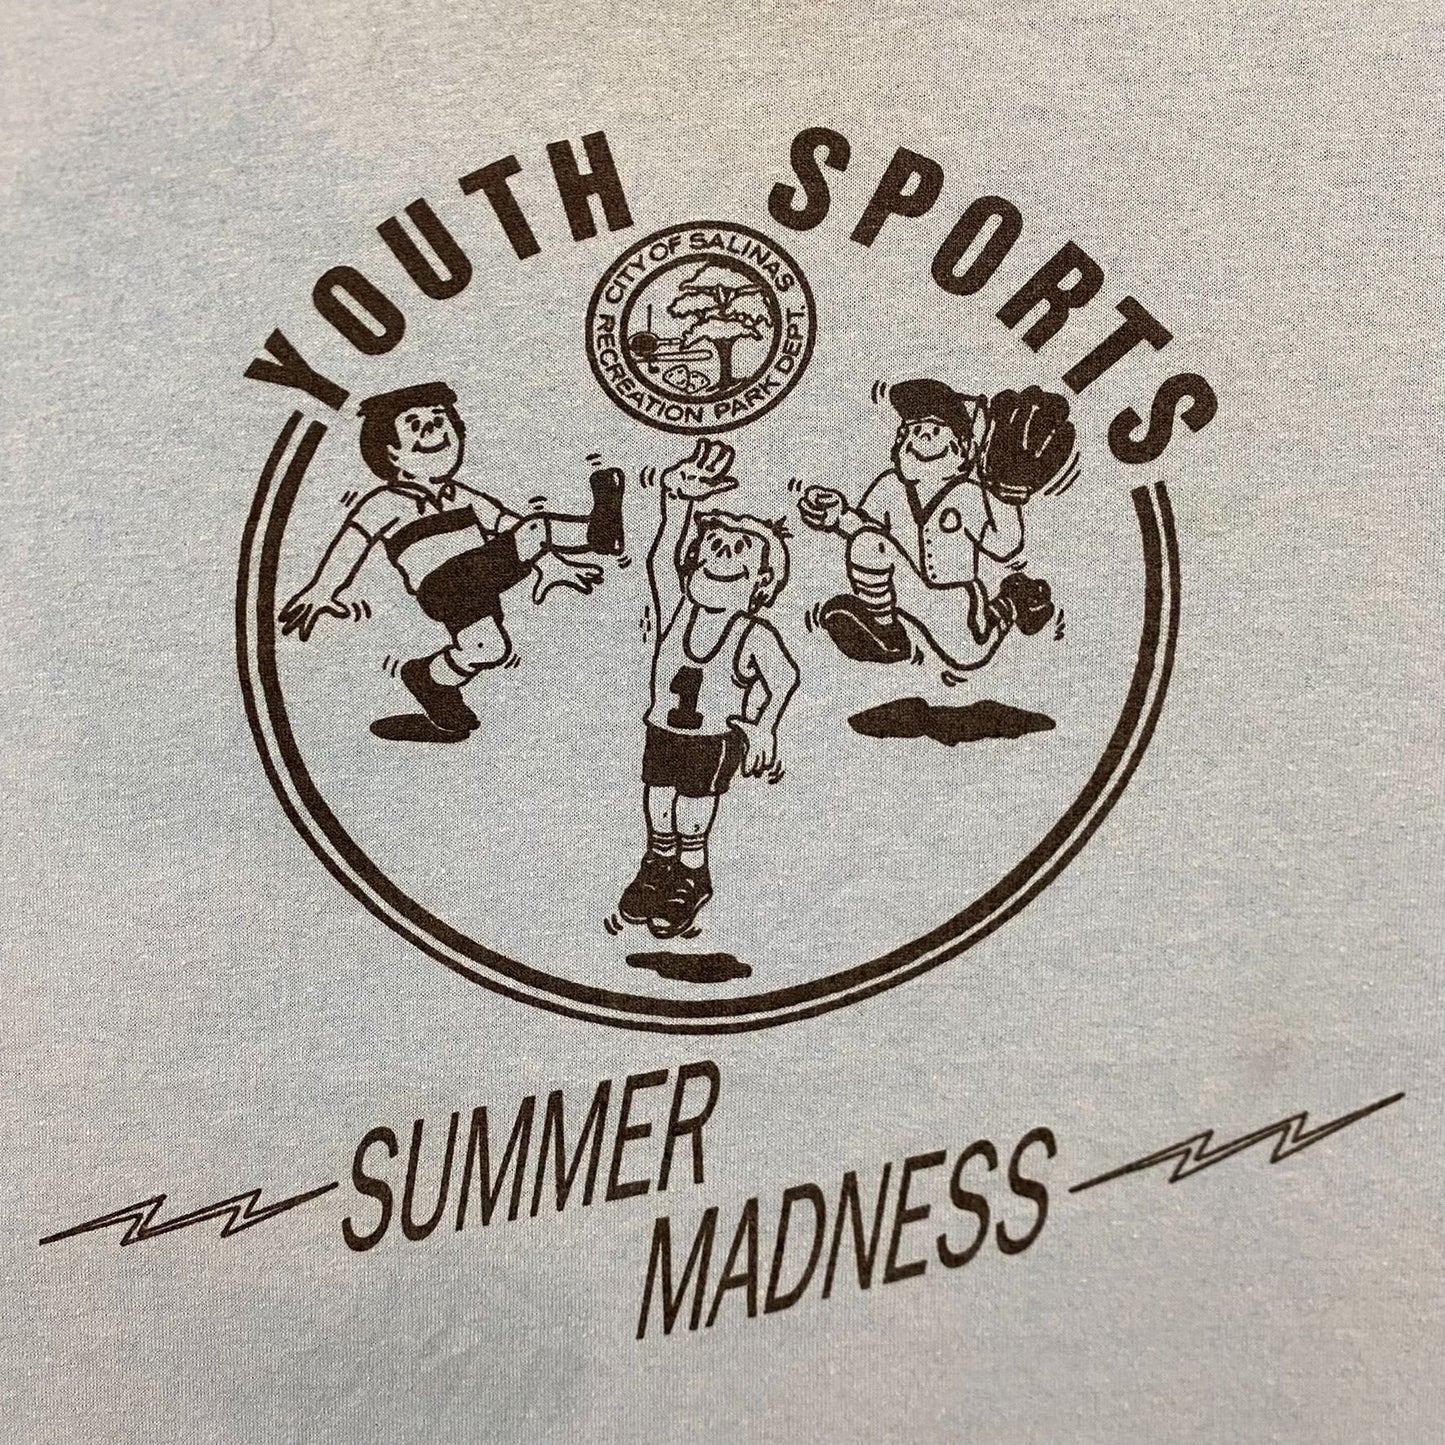 Vintage 80s Essential Summer Youth Sports Single Stitch Tee